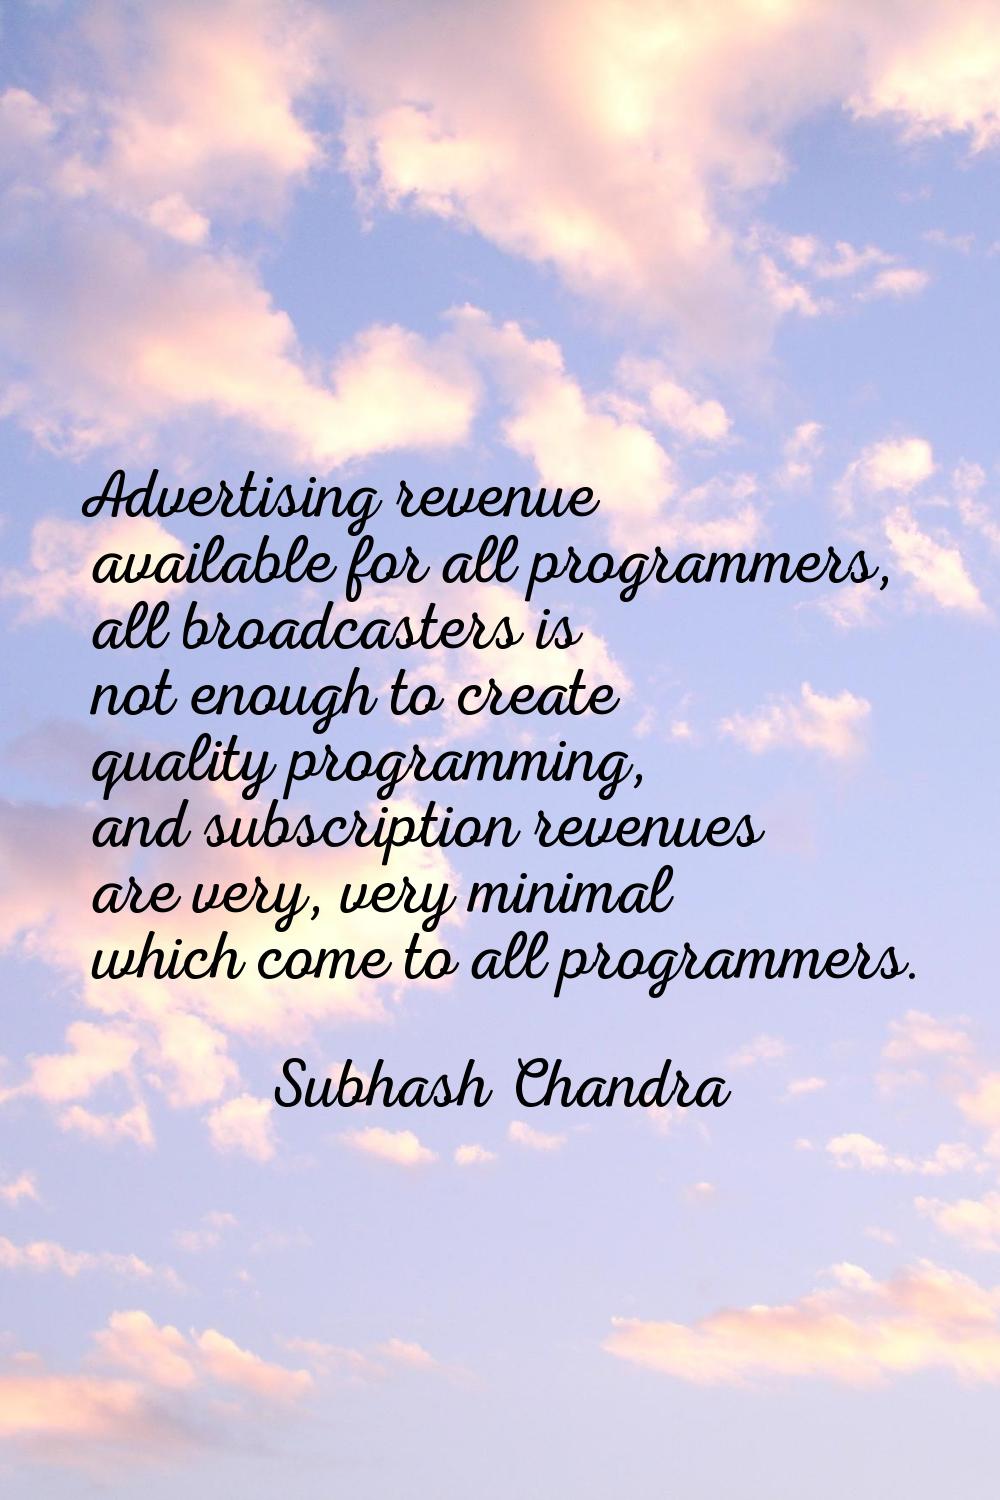 Advertising revenue available for all programmers, all broadcasters is not enough to create quality